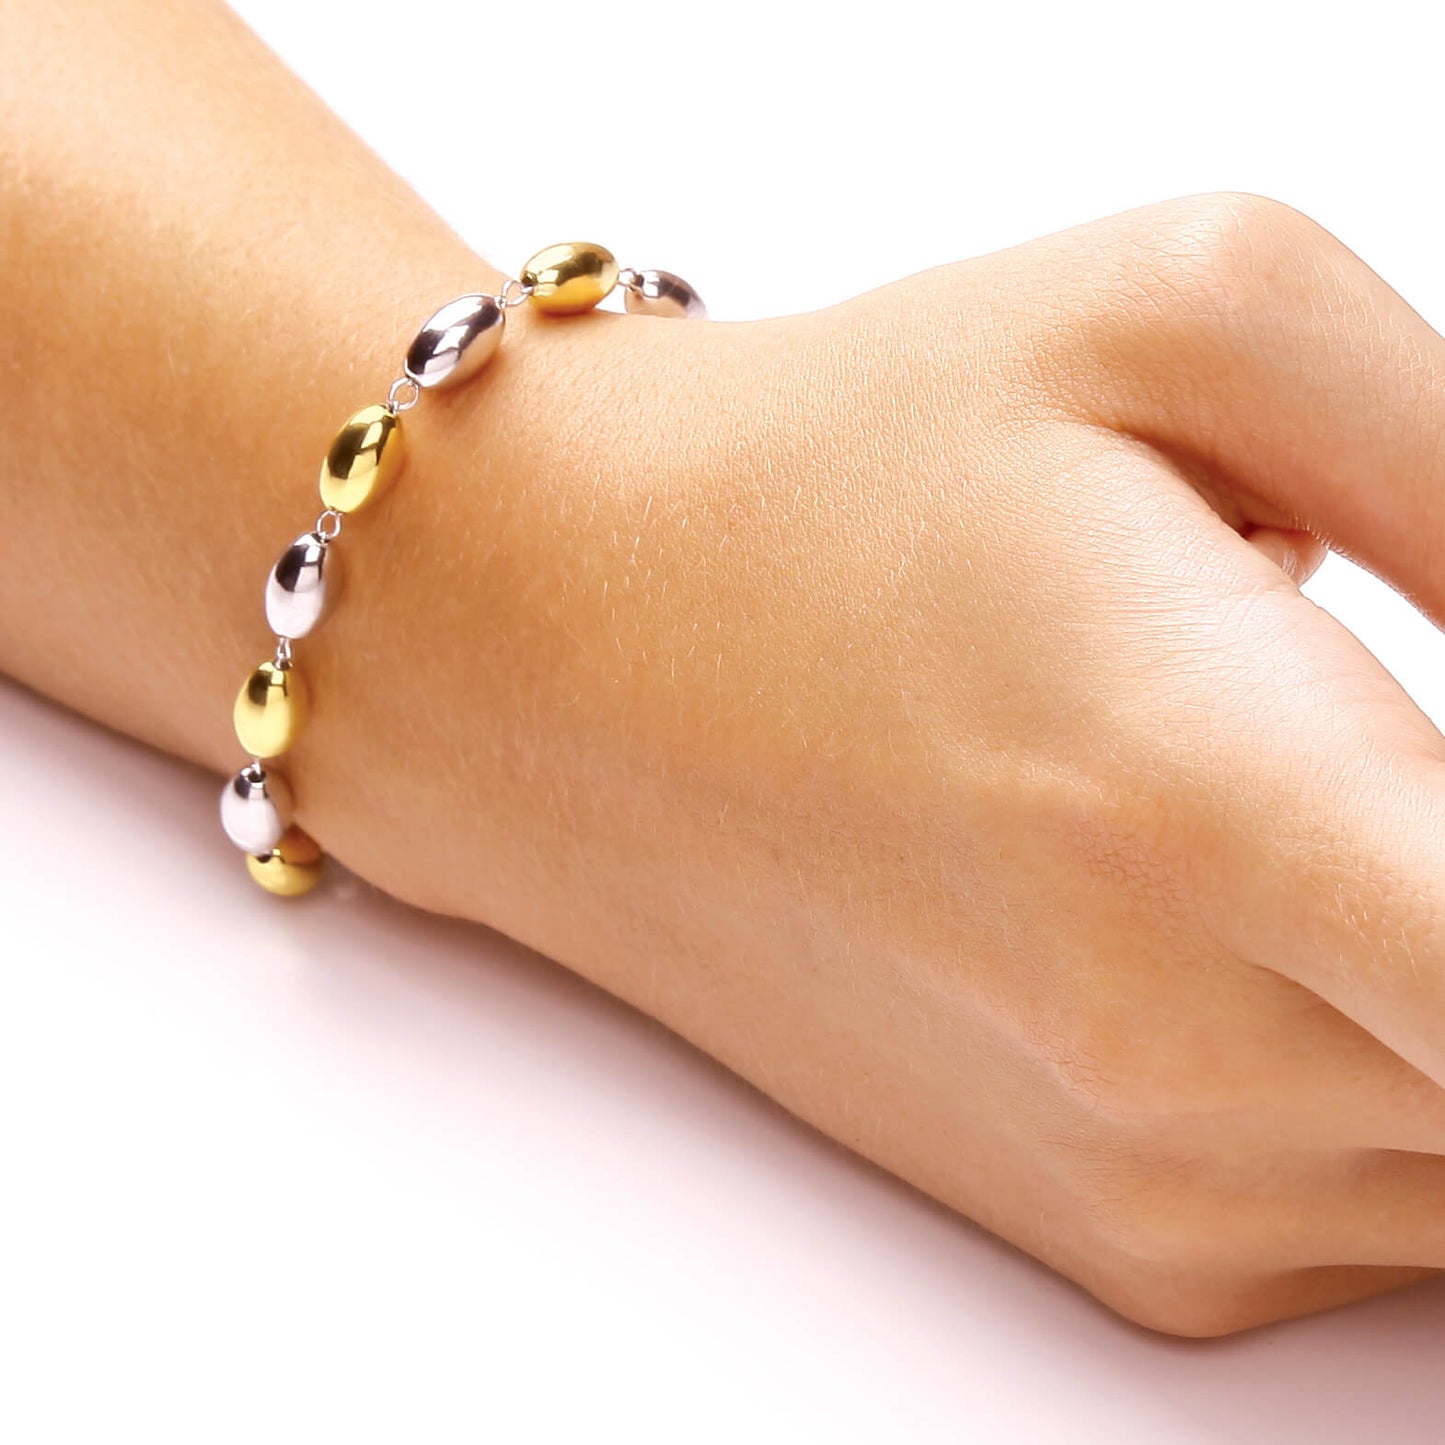 Gold Plated 925 Sterling Silver Bead Bracelet-7" 302159 - FJewellery